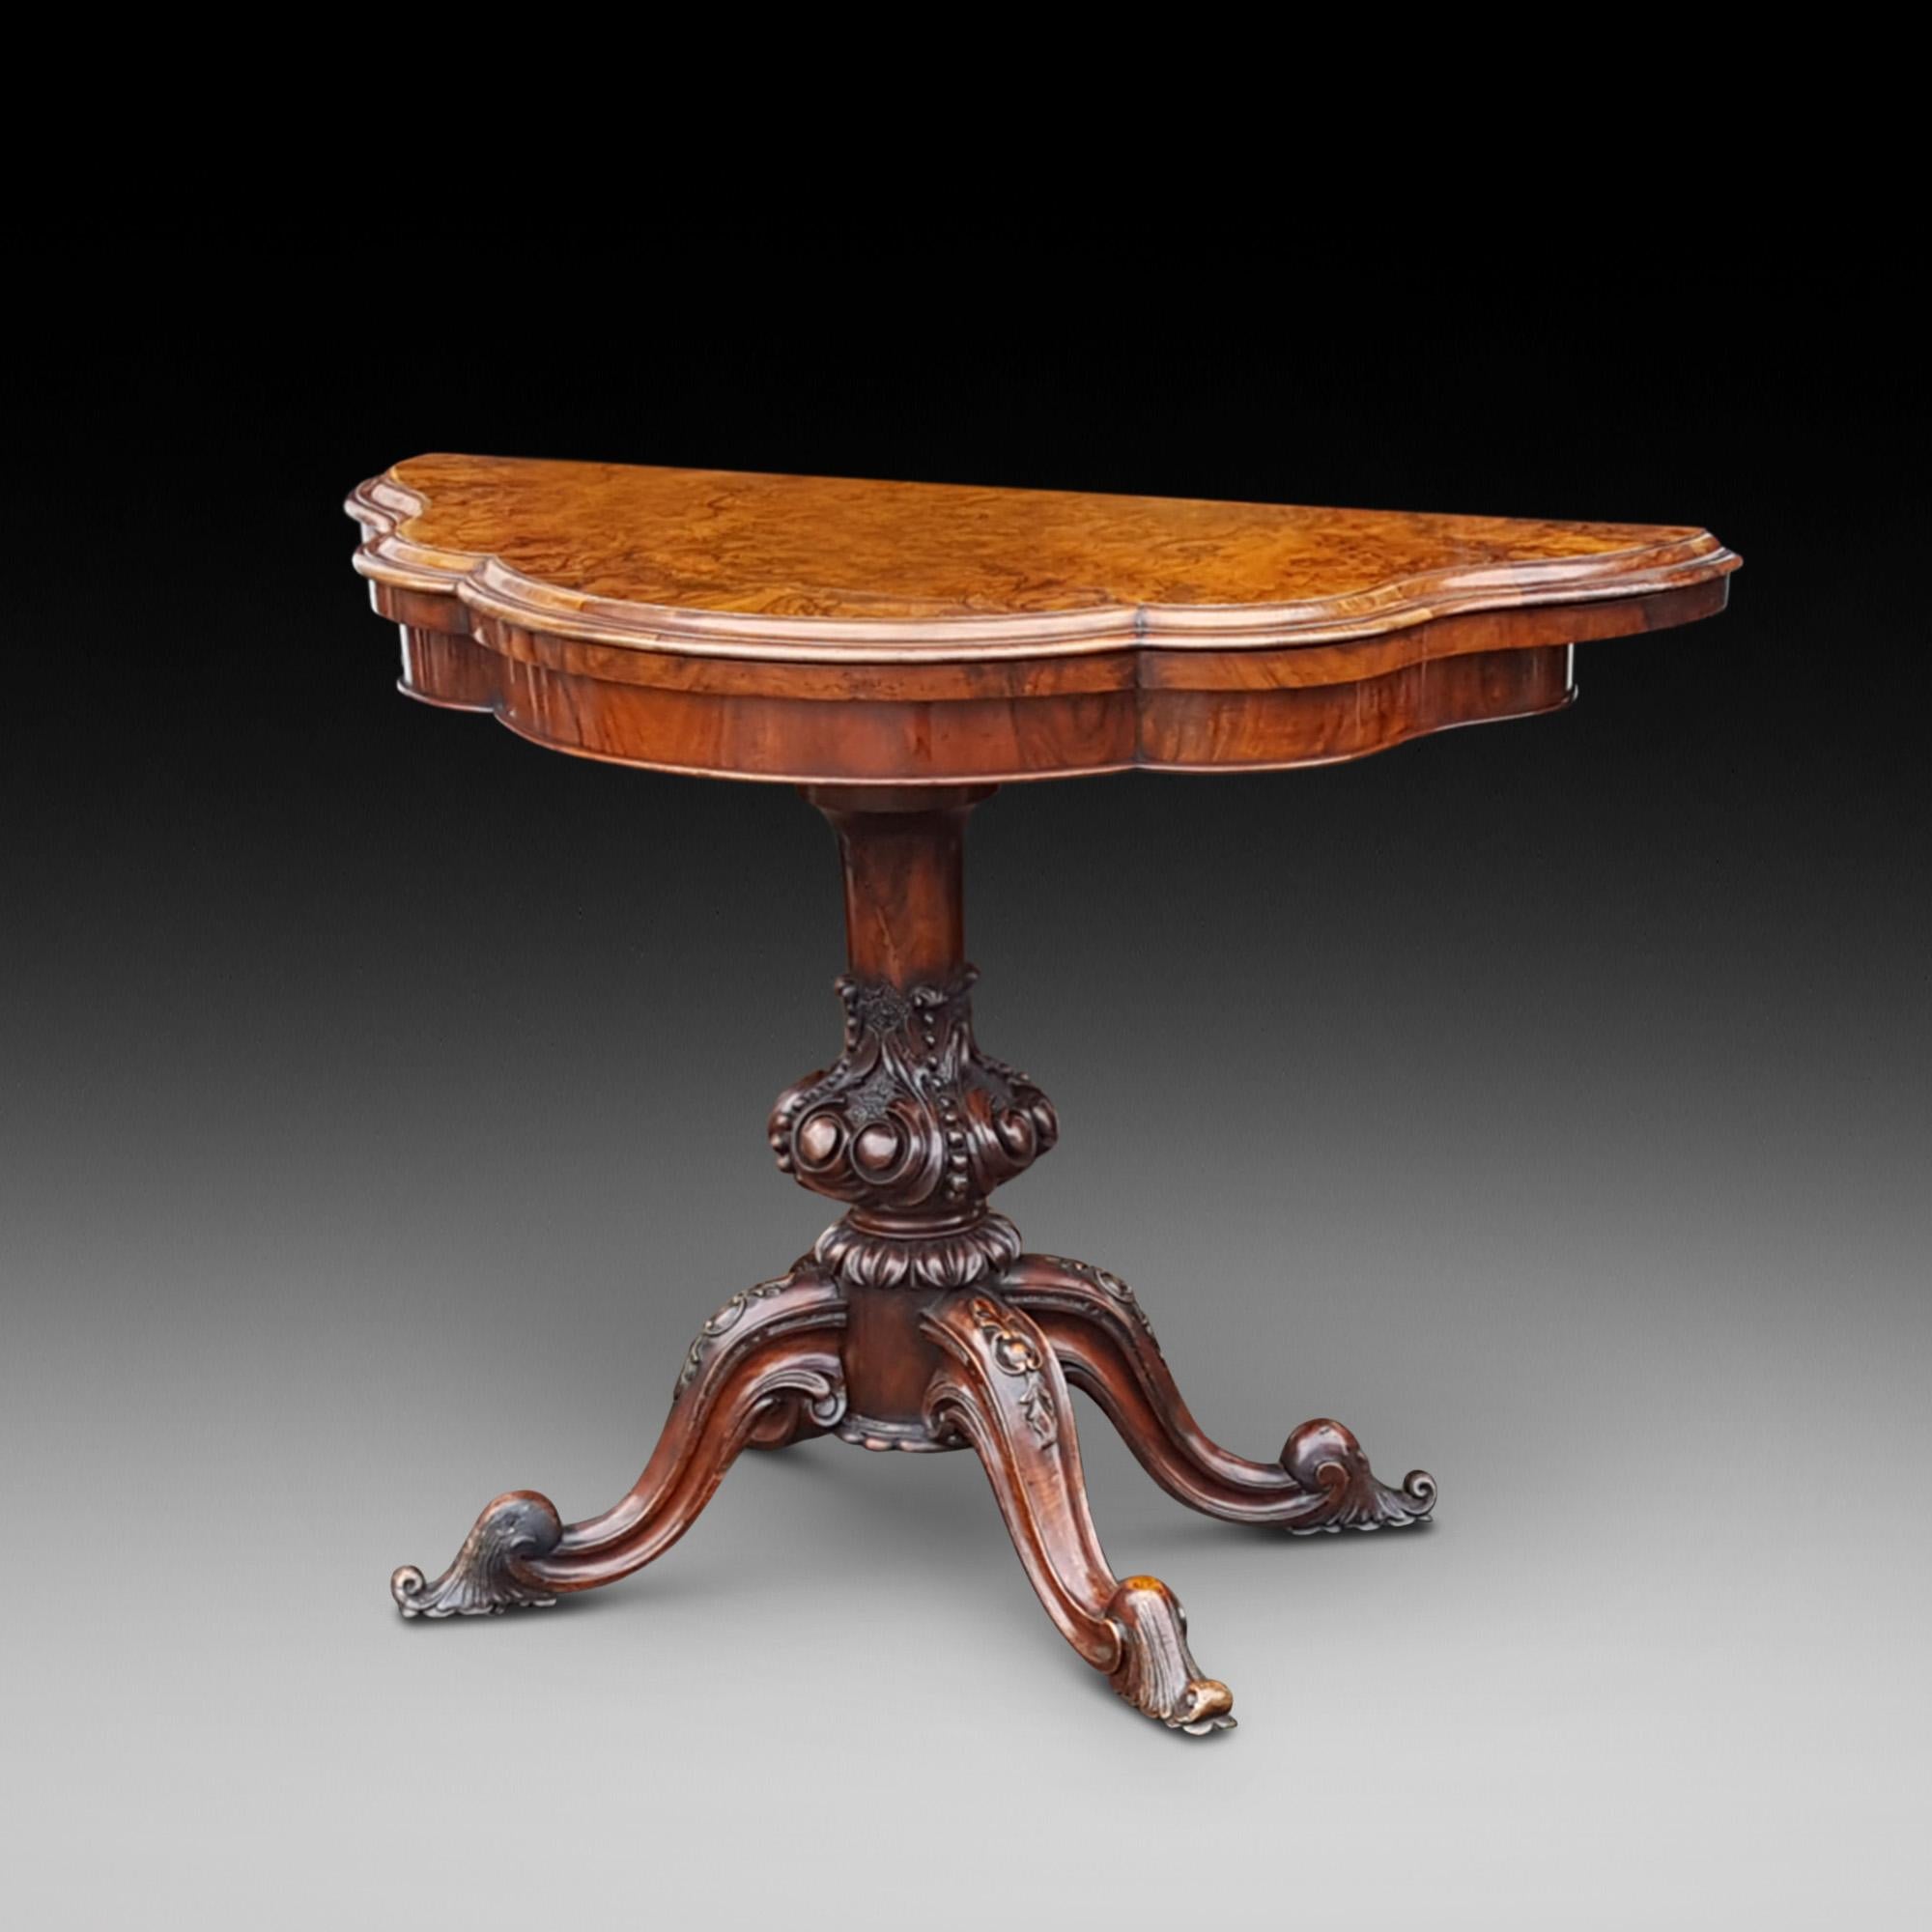 Late Victorian Burr walnut serpentine shape card table with turned and carved baluster column scroll legs and feet with blind castors 40.5